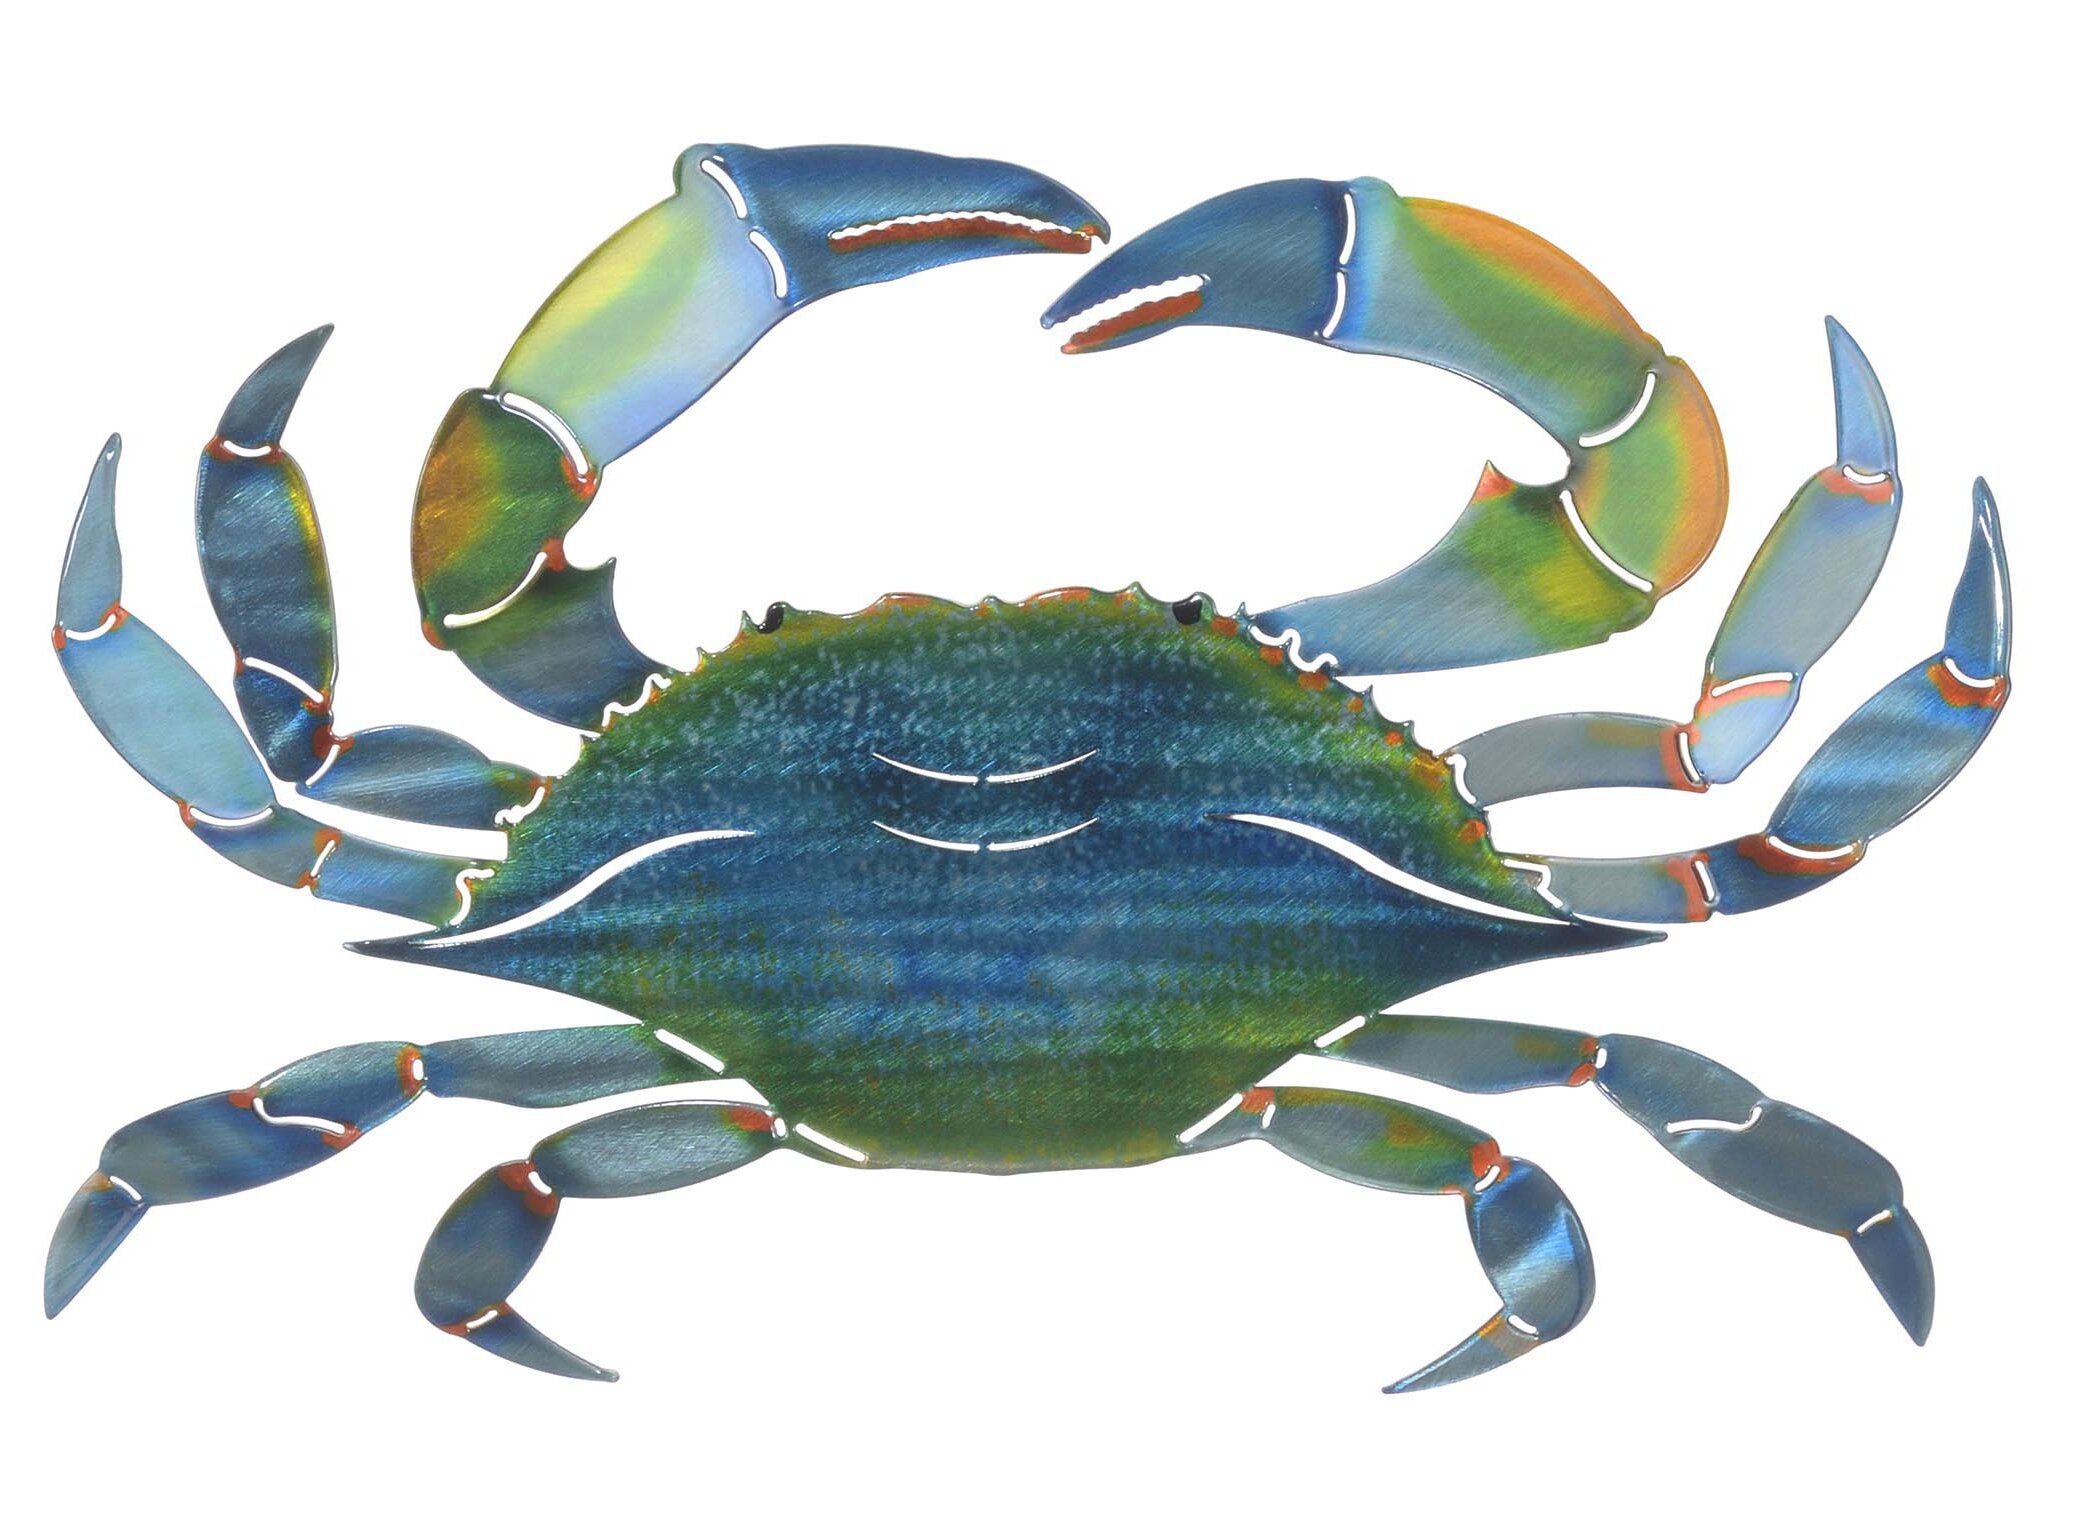 53 HQ Photos Blue Crab Wall Decor - Blue Crab Wall Decor Set Of 6 Only